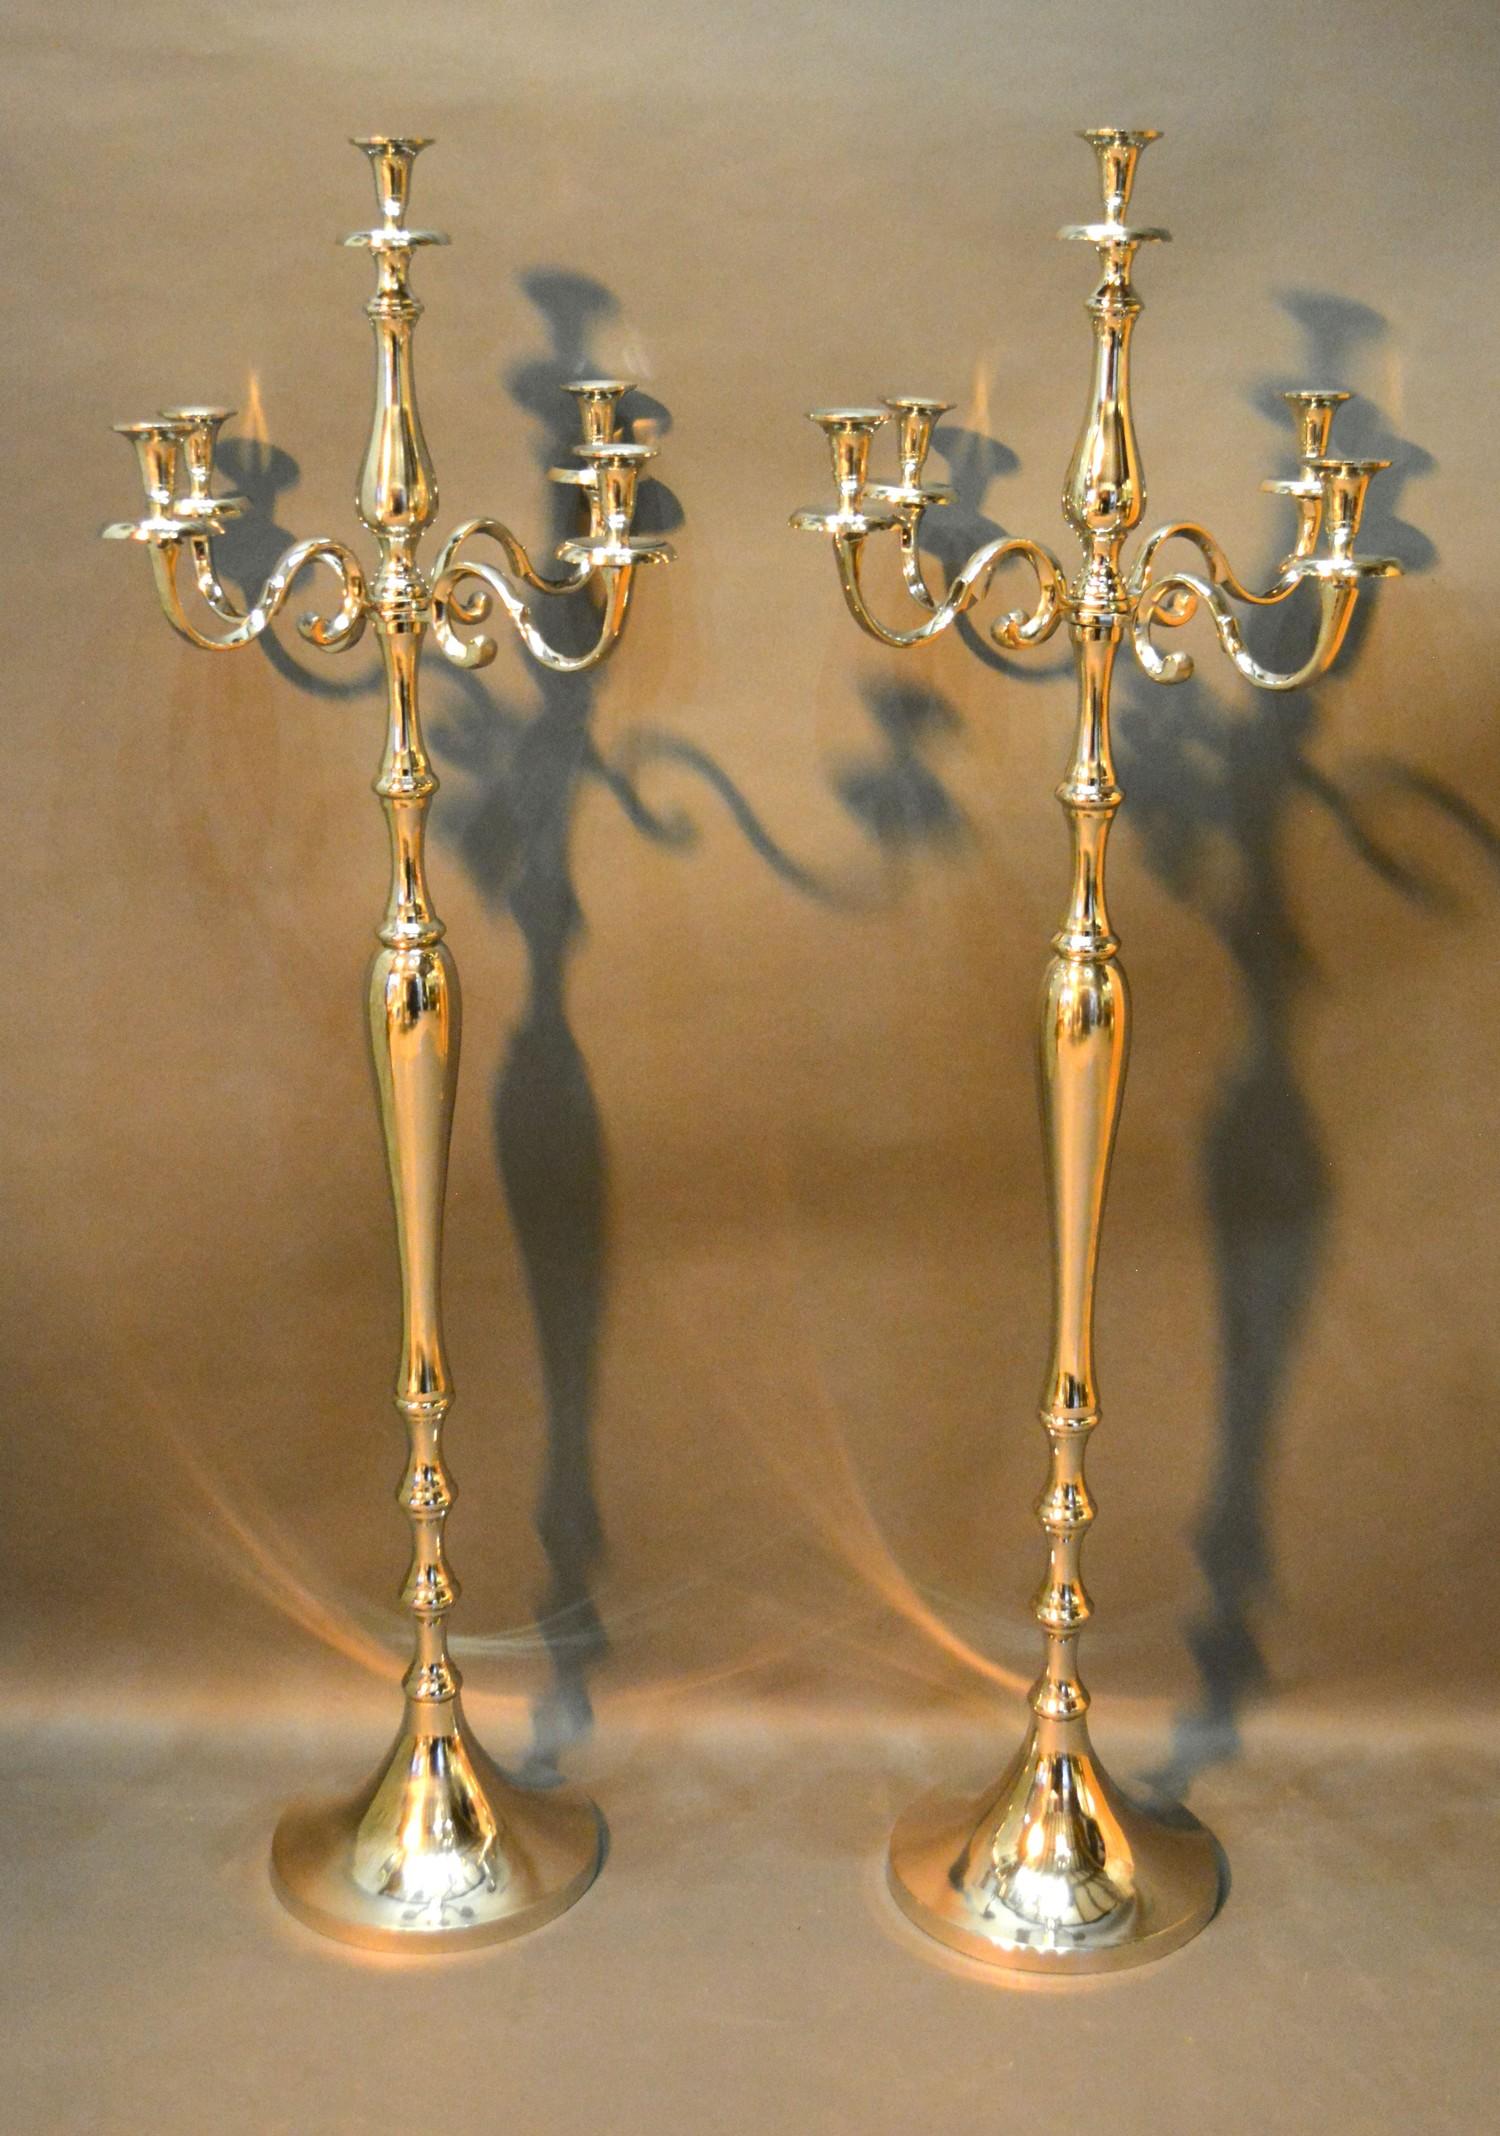 A Pair of Floor Standing Chromium Five Branch Candelabrum with circular bases, 149 cms tall